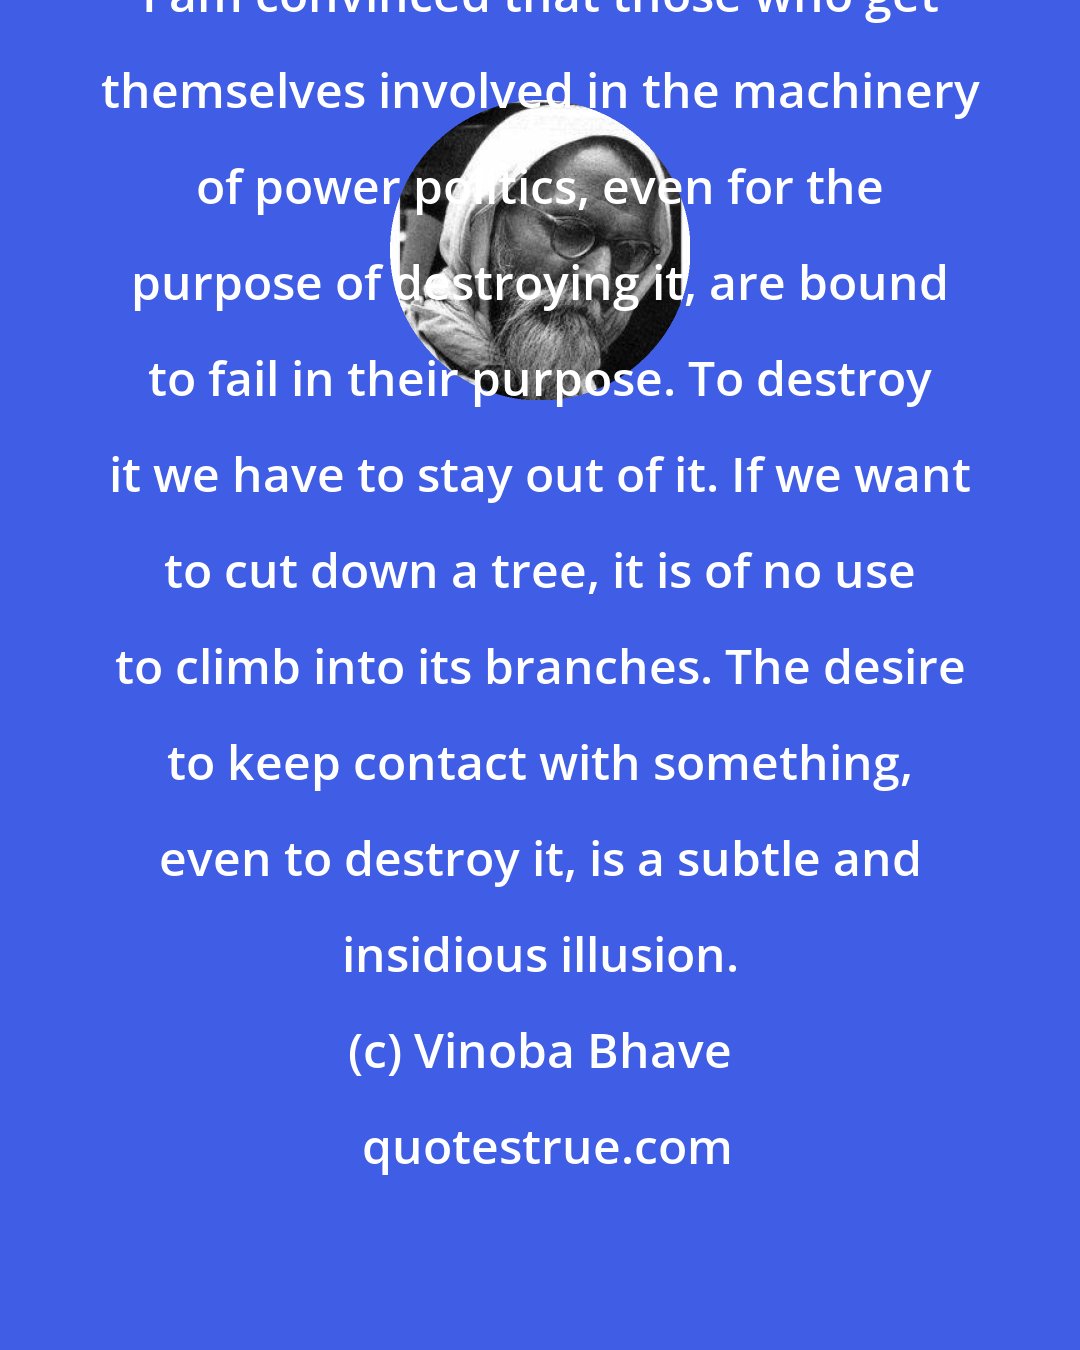 Vinoba Bhave: I am convinced that those who get themselves involved in the machinery of power politics, even for the purpose of destroying it, are bound to fail in their purpose. To destroy it we have to stay out of it. If we want to cut down a tree, it is of no use to climb into its branches. The desire to keep contact with something, even to destroy it, is a subtle and insidious illusion.